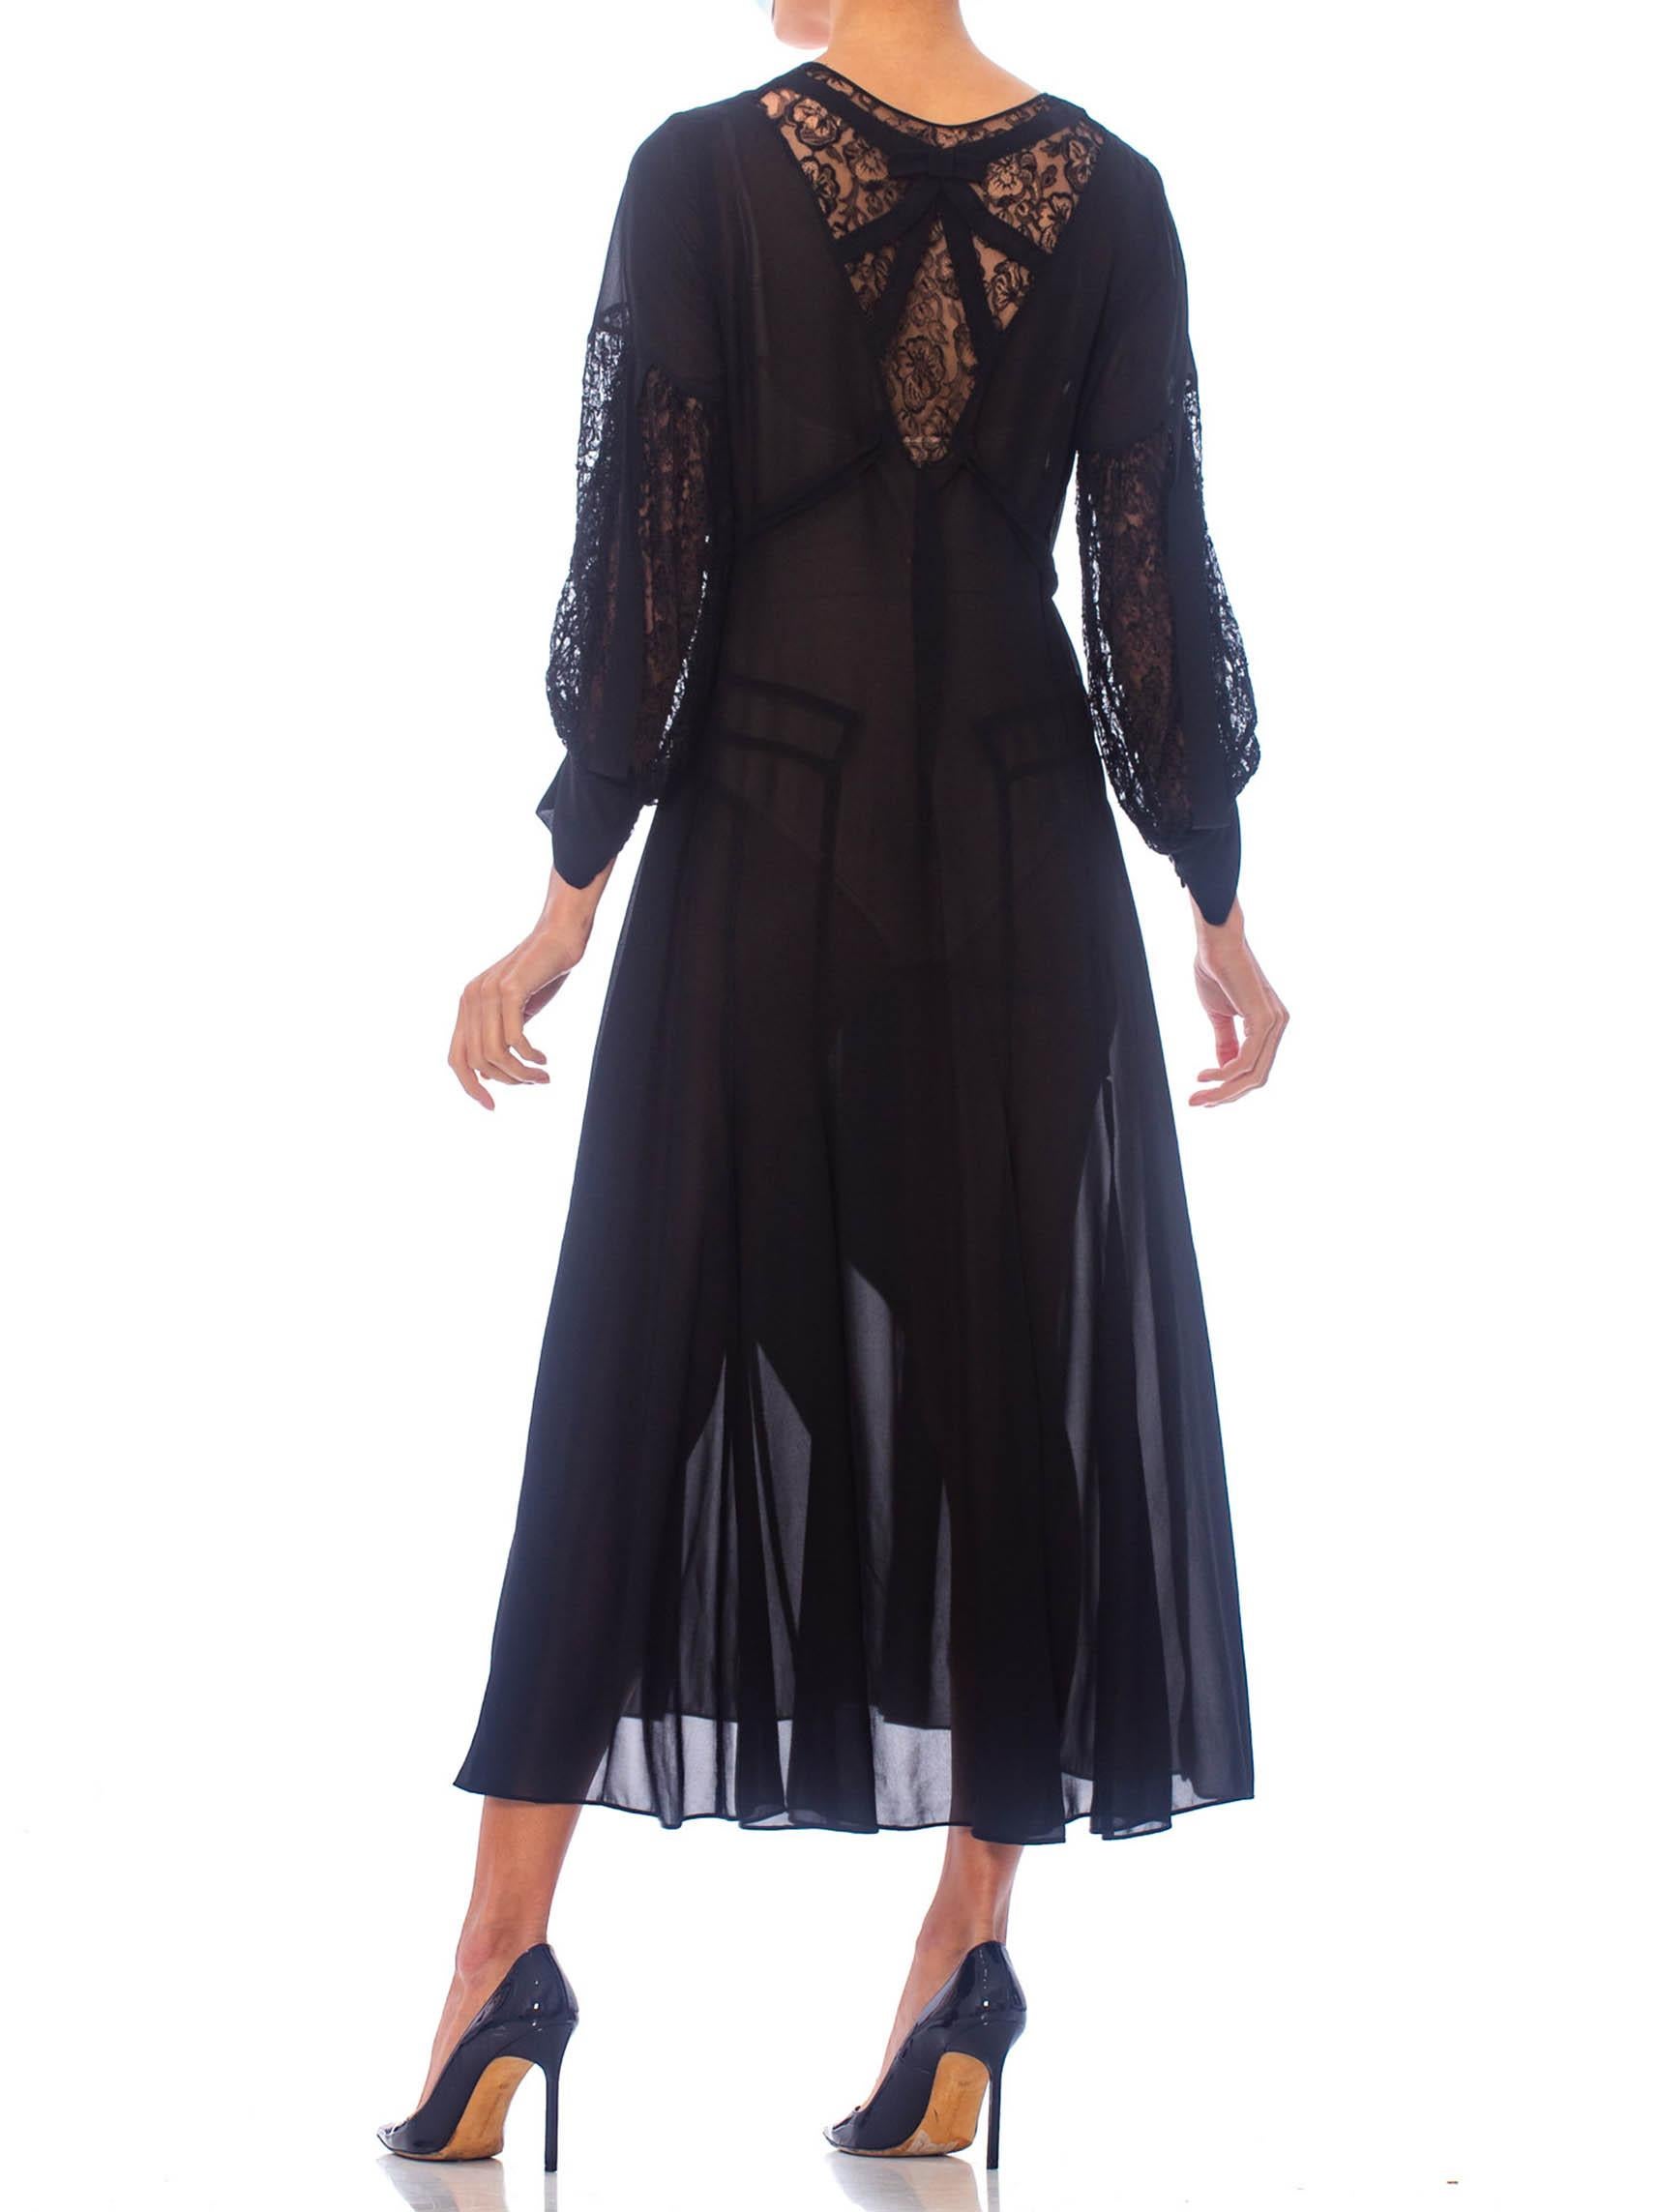 1930S Black Silk Chiffon Tie Waist Dress With Lace Inset Sleeves For Sale 7